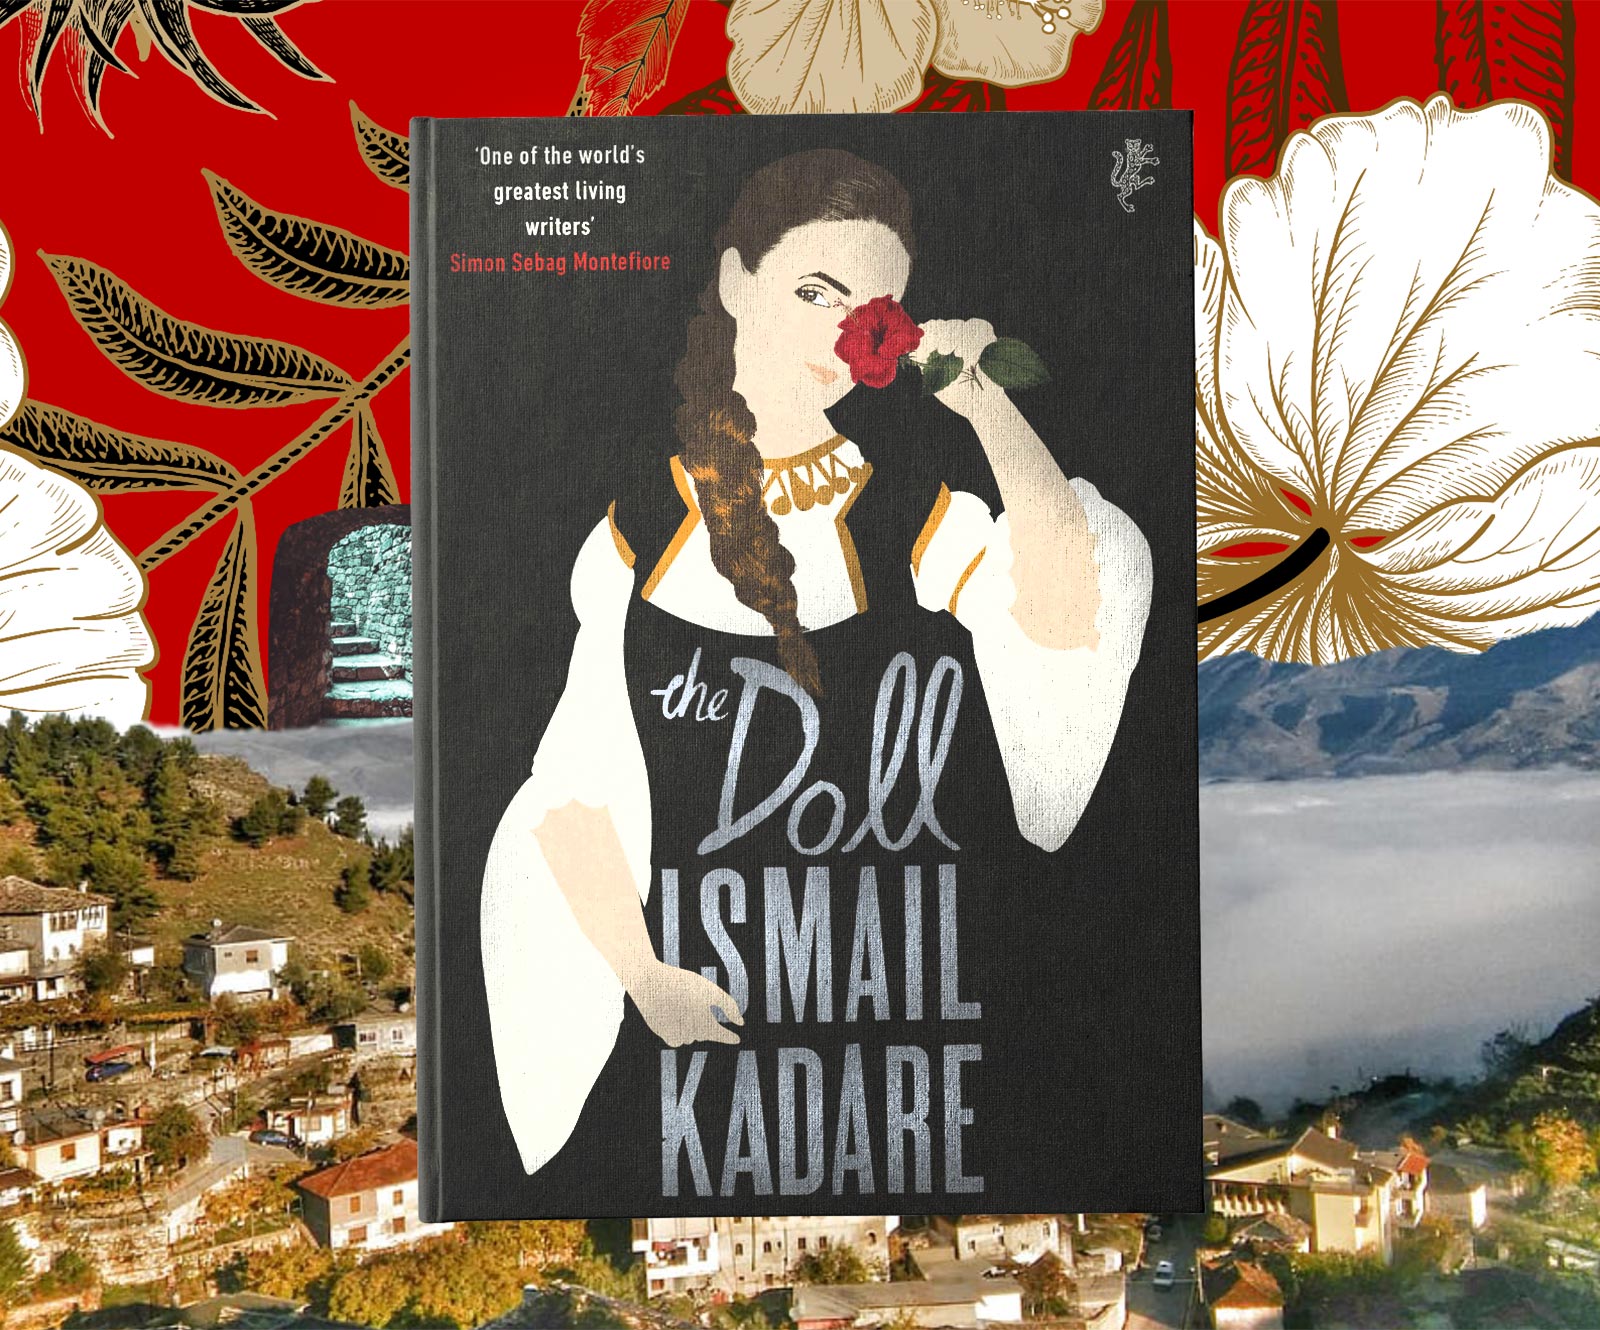 Can you ever truly know your mother? In the novel The Doll, Ismail Kadare thinks you can't